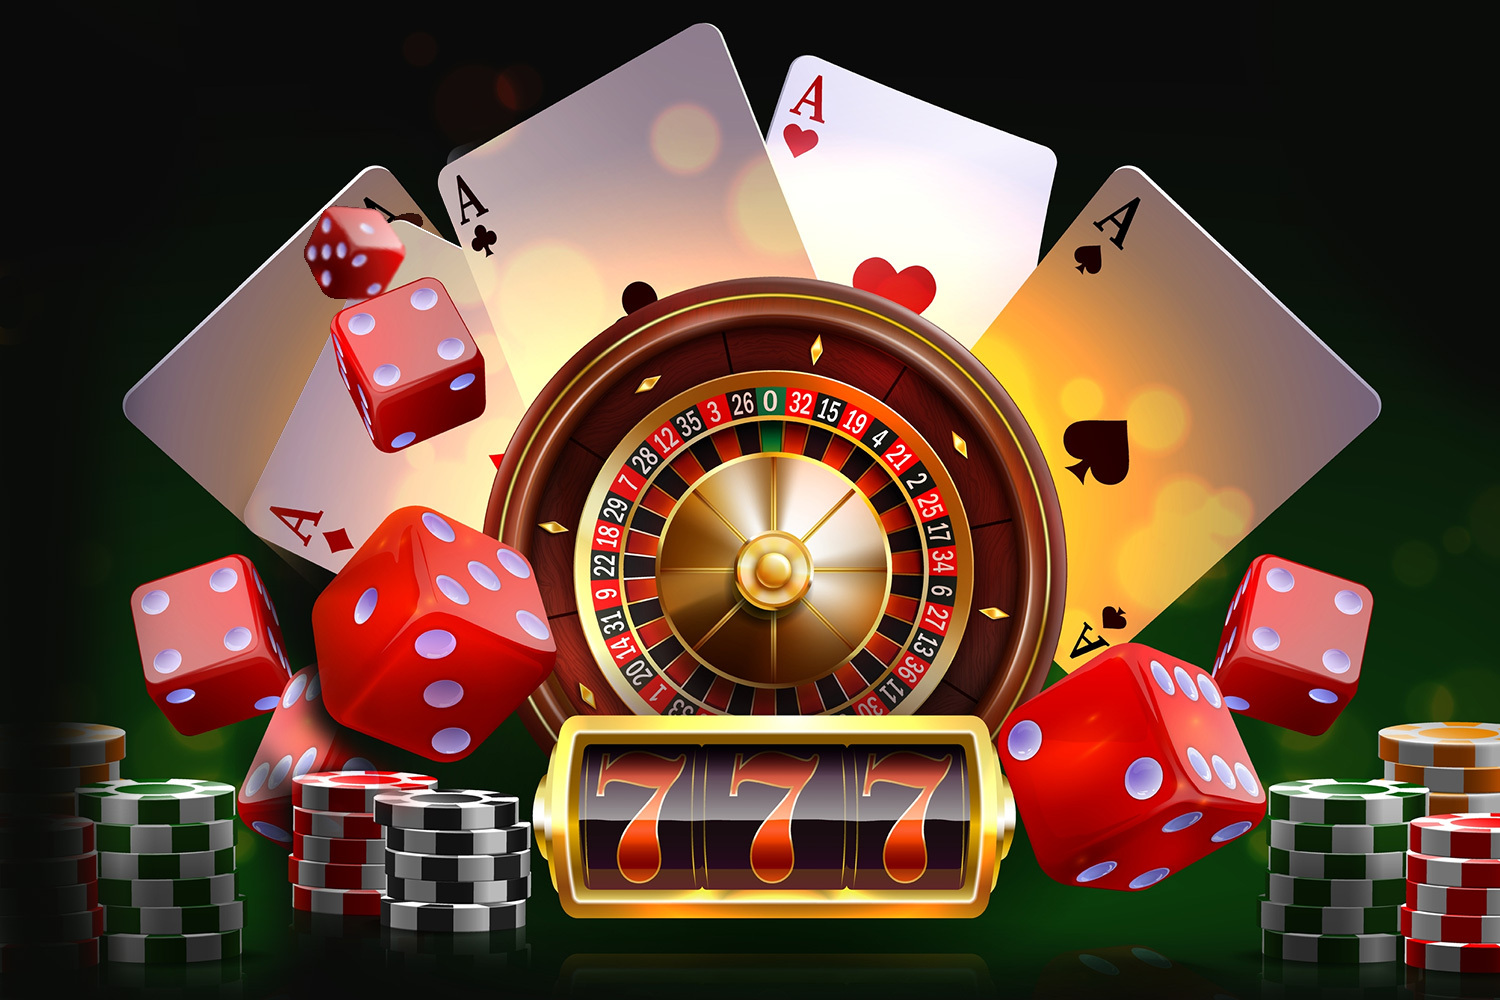 5 best games to play at an online casino